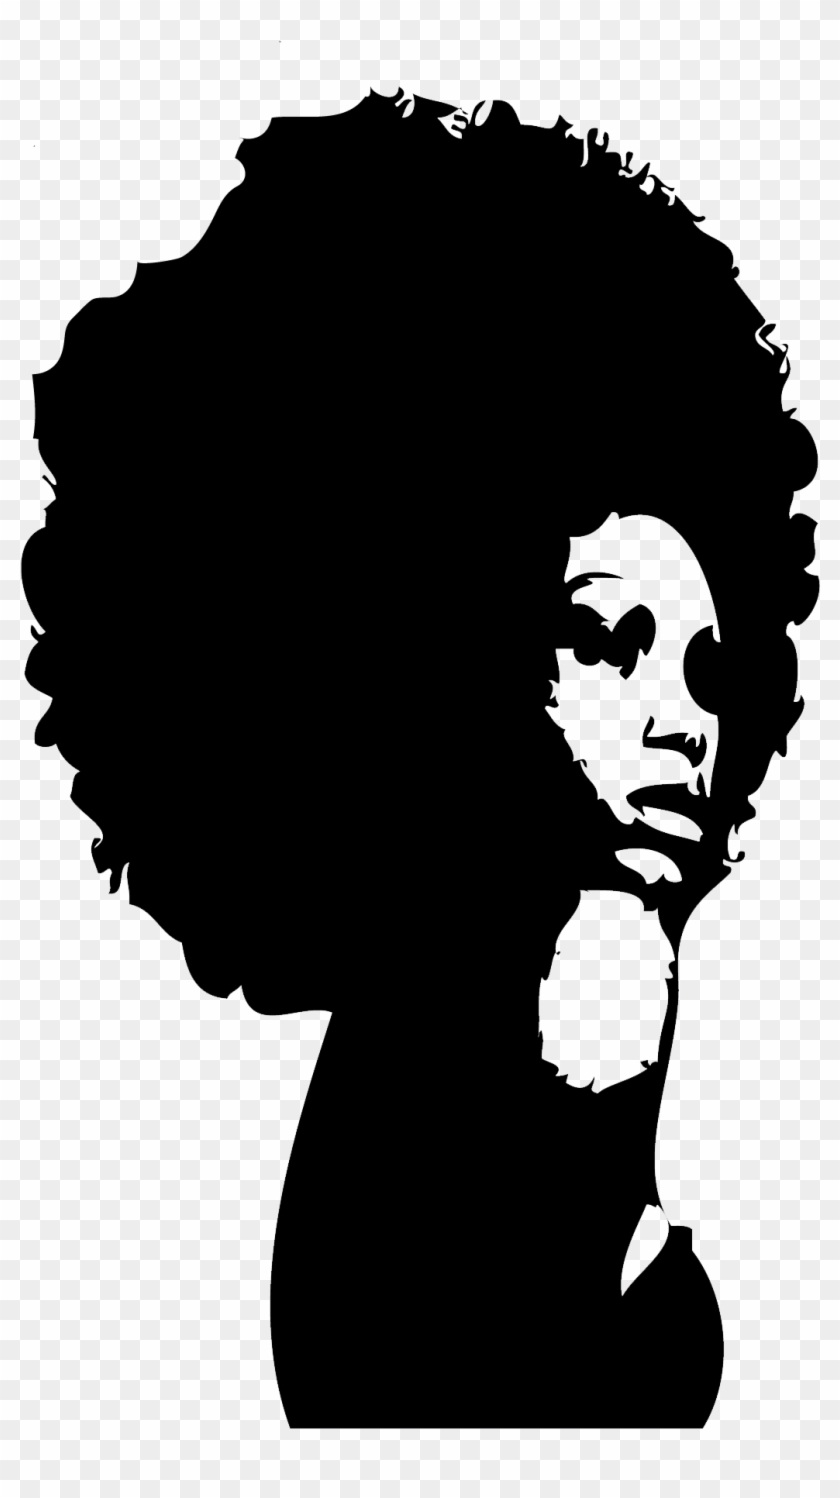 Curly Afro Silhouette At Getdrawings - Silhouette Black Woman Afro Clipart #1041744